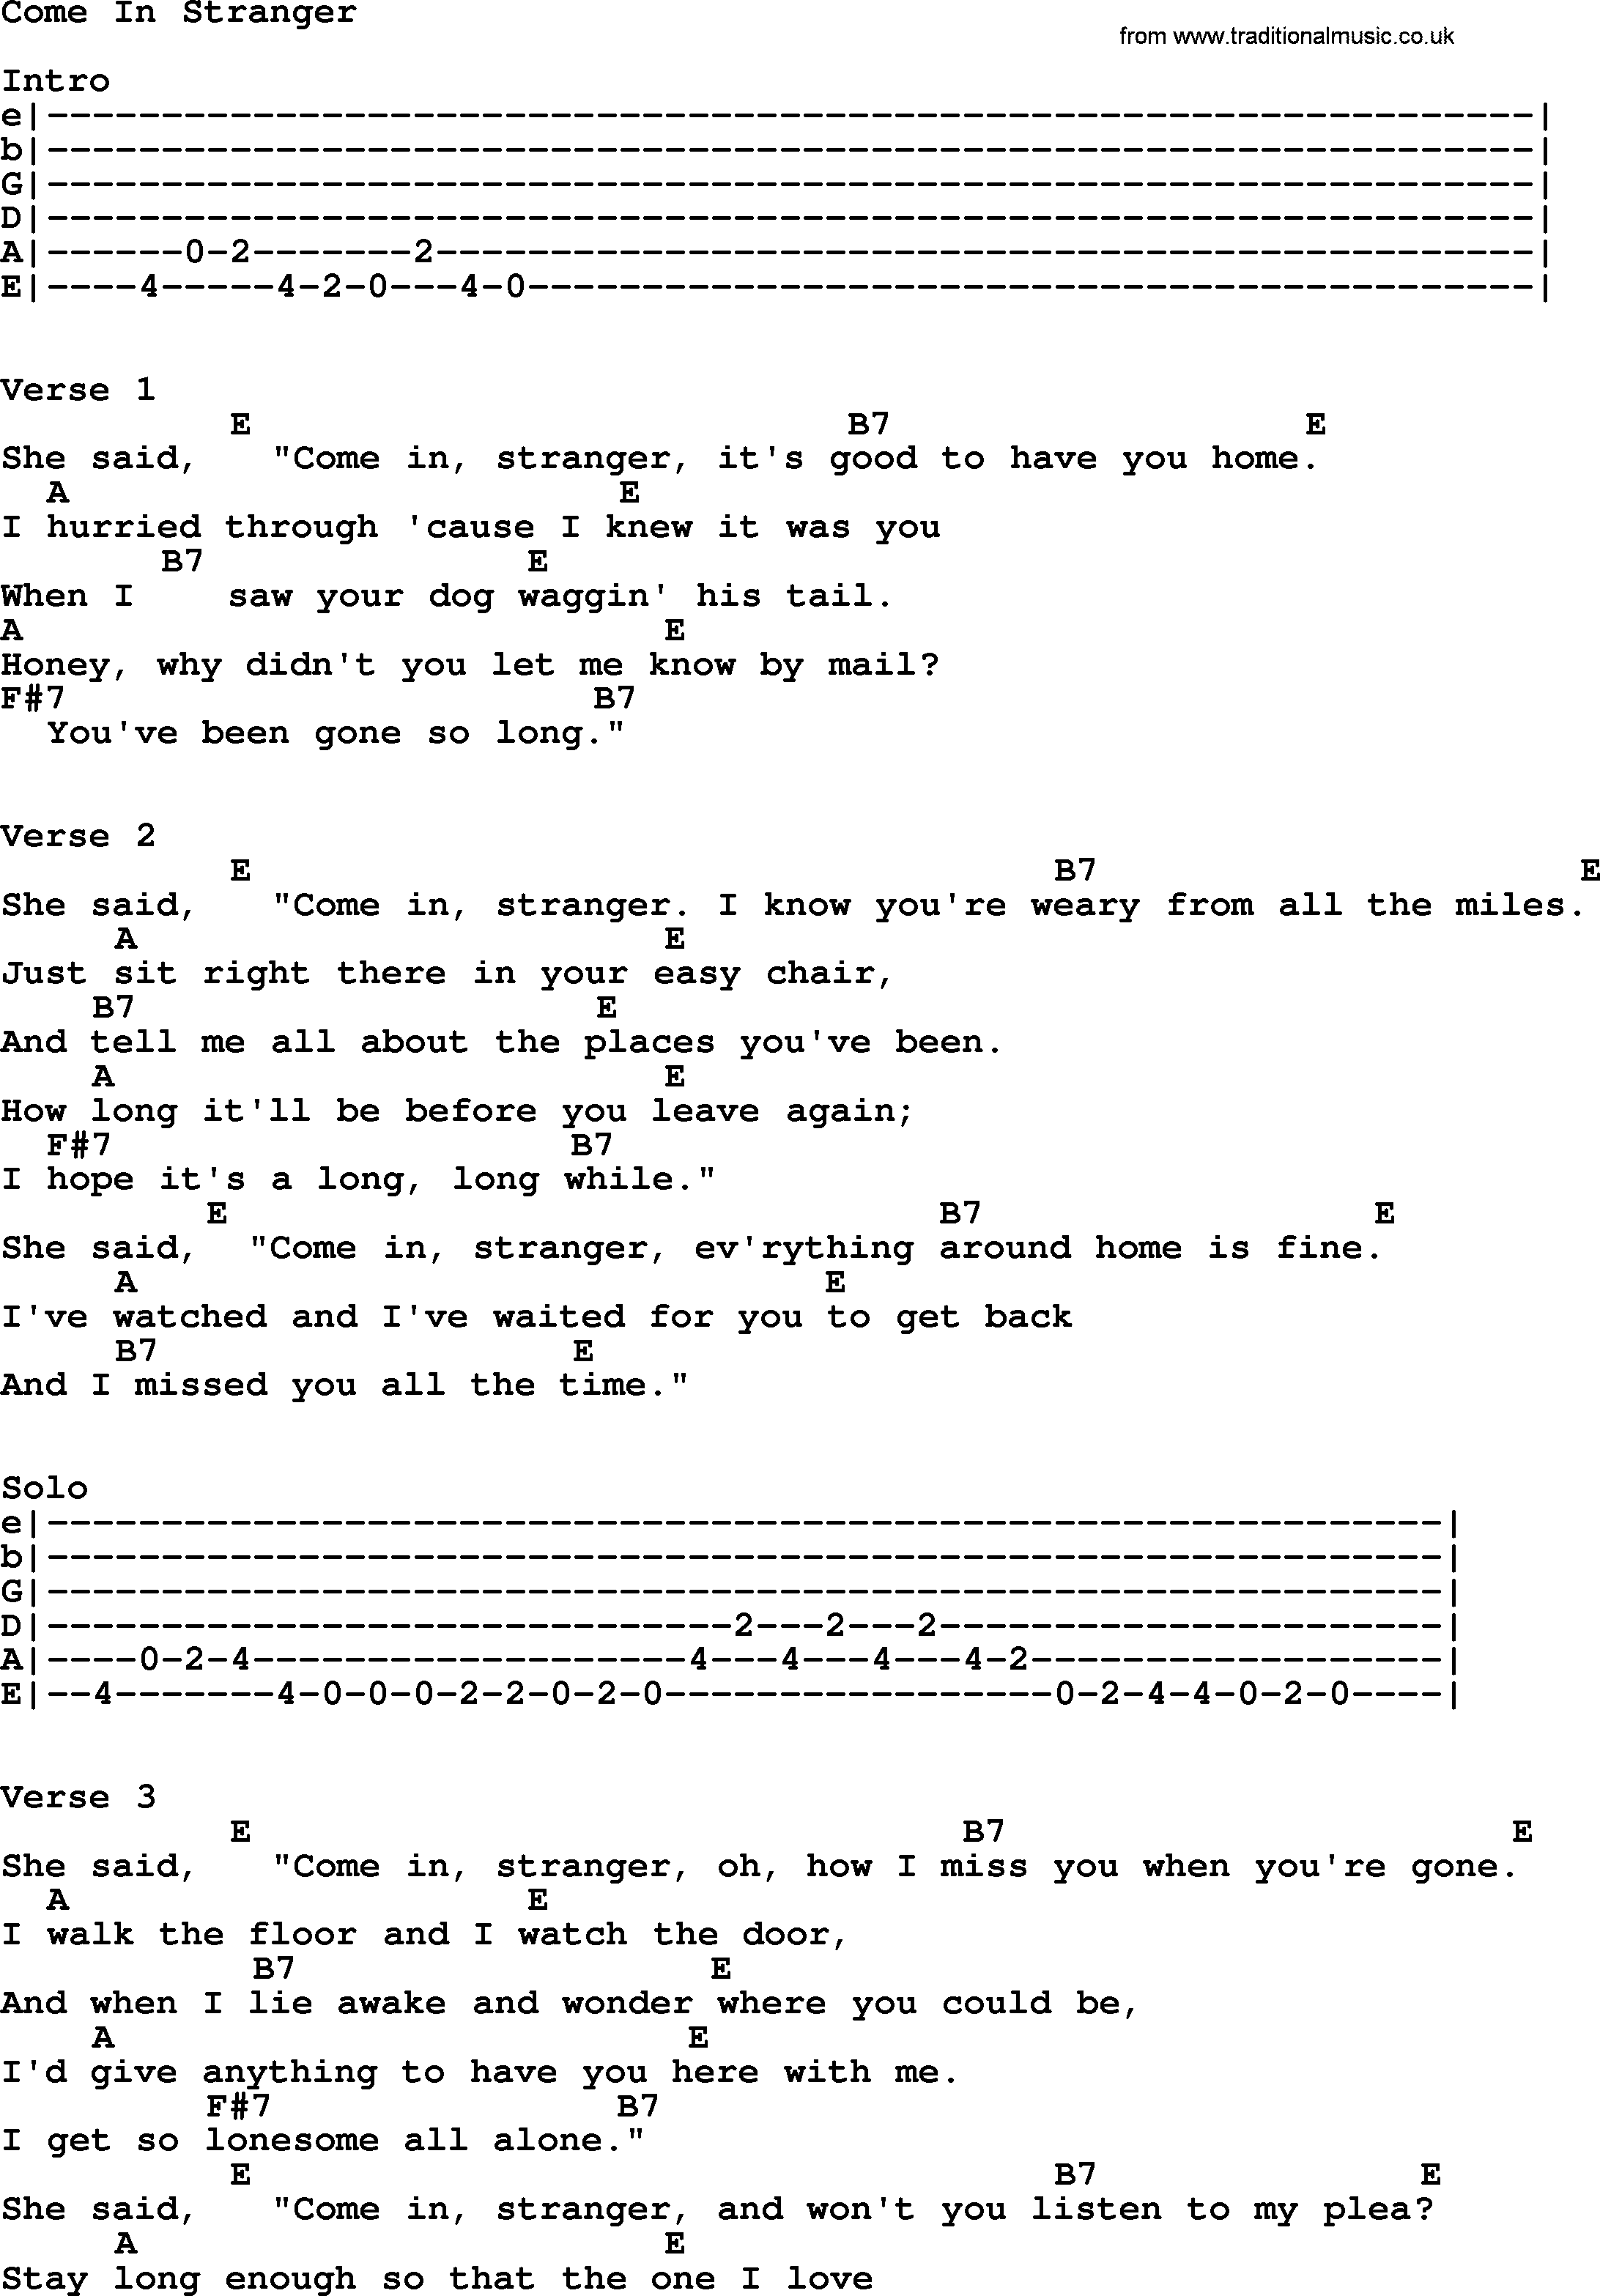 Johnny Cash song Come In Stranger, lyrics and chords